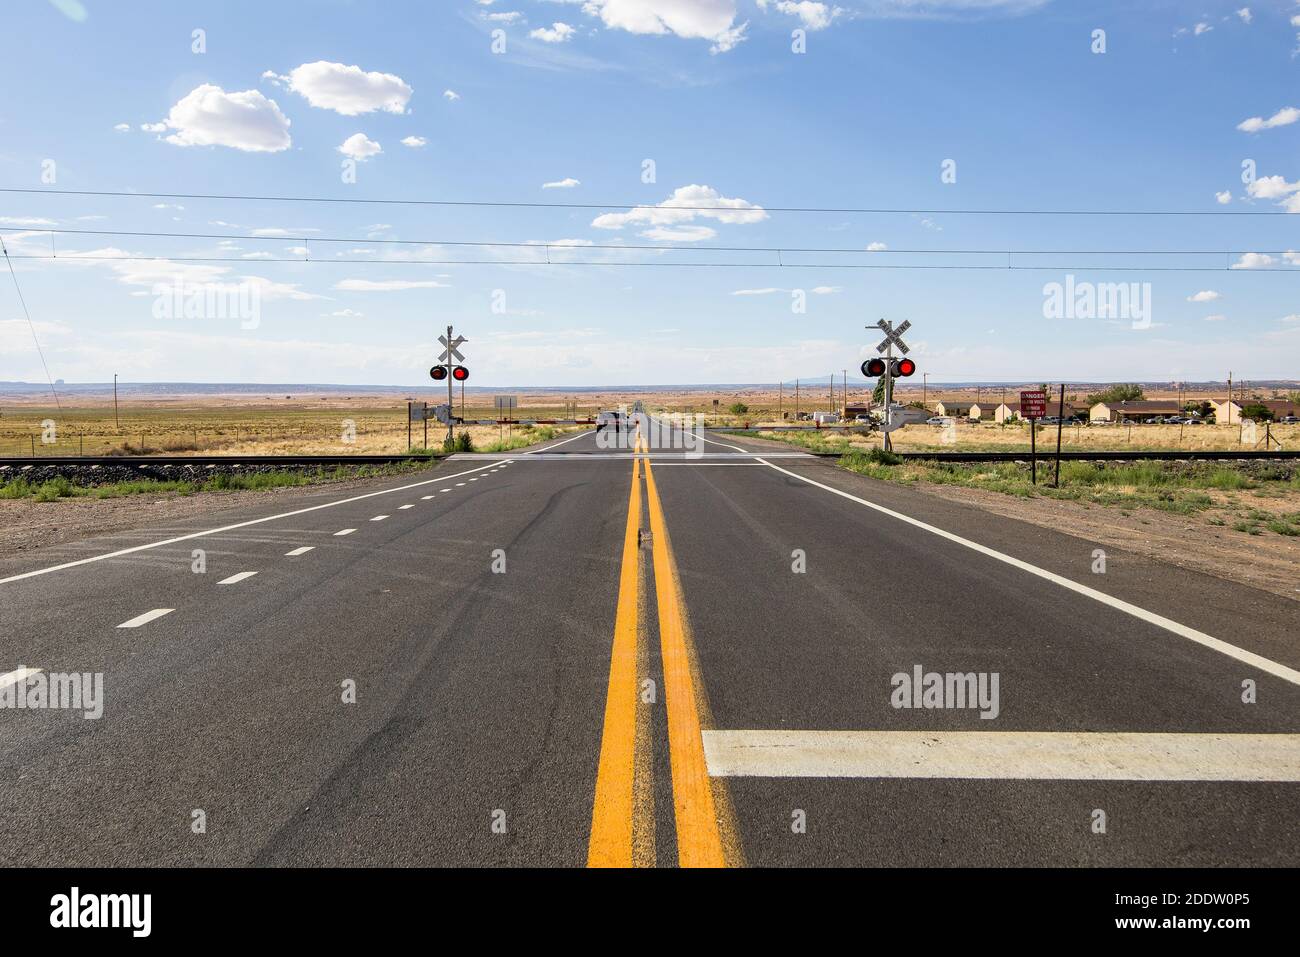 A track railway  crossing on the two-lane rural Mojave desert highway - old Route 66. Dry arid envirnoment under a cloudy blue sky - A red-light railw Stock Photo